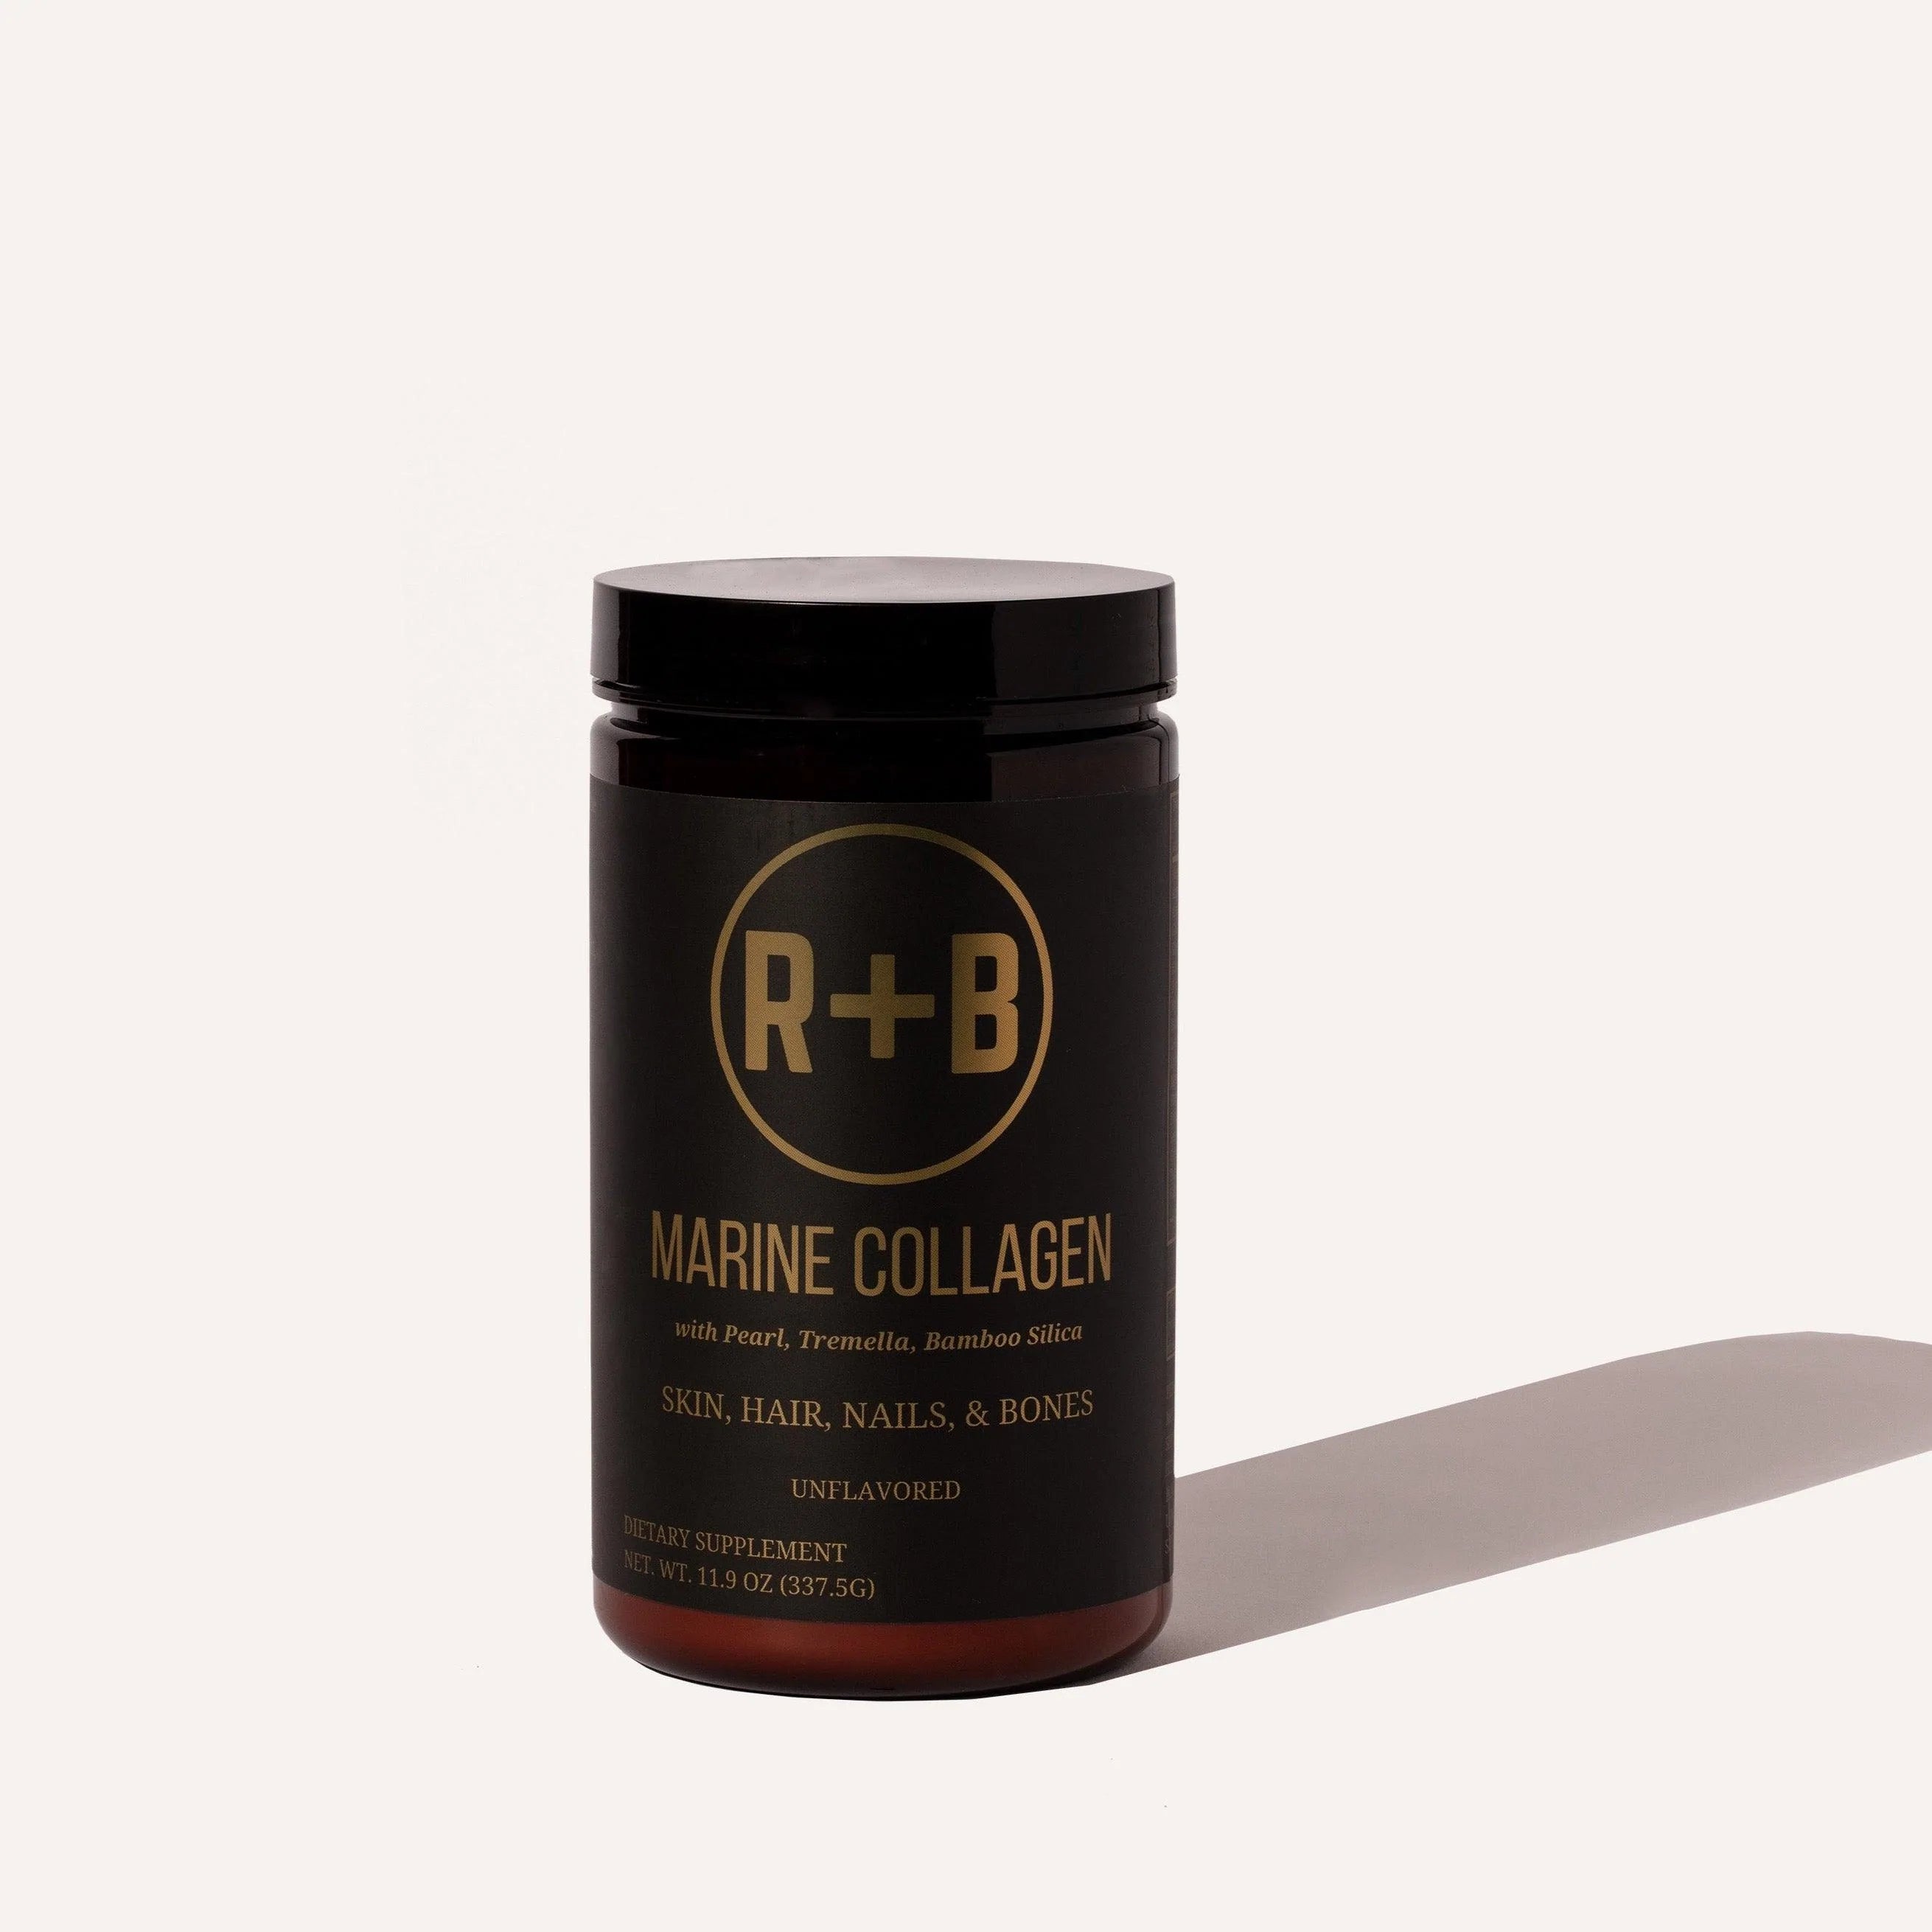 Marine Collagen with Pearl, Tremella and Bamboo Silica - rootandbones